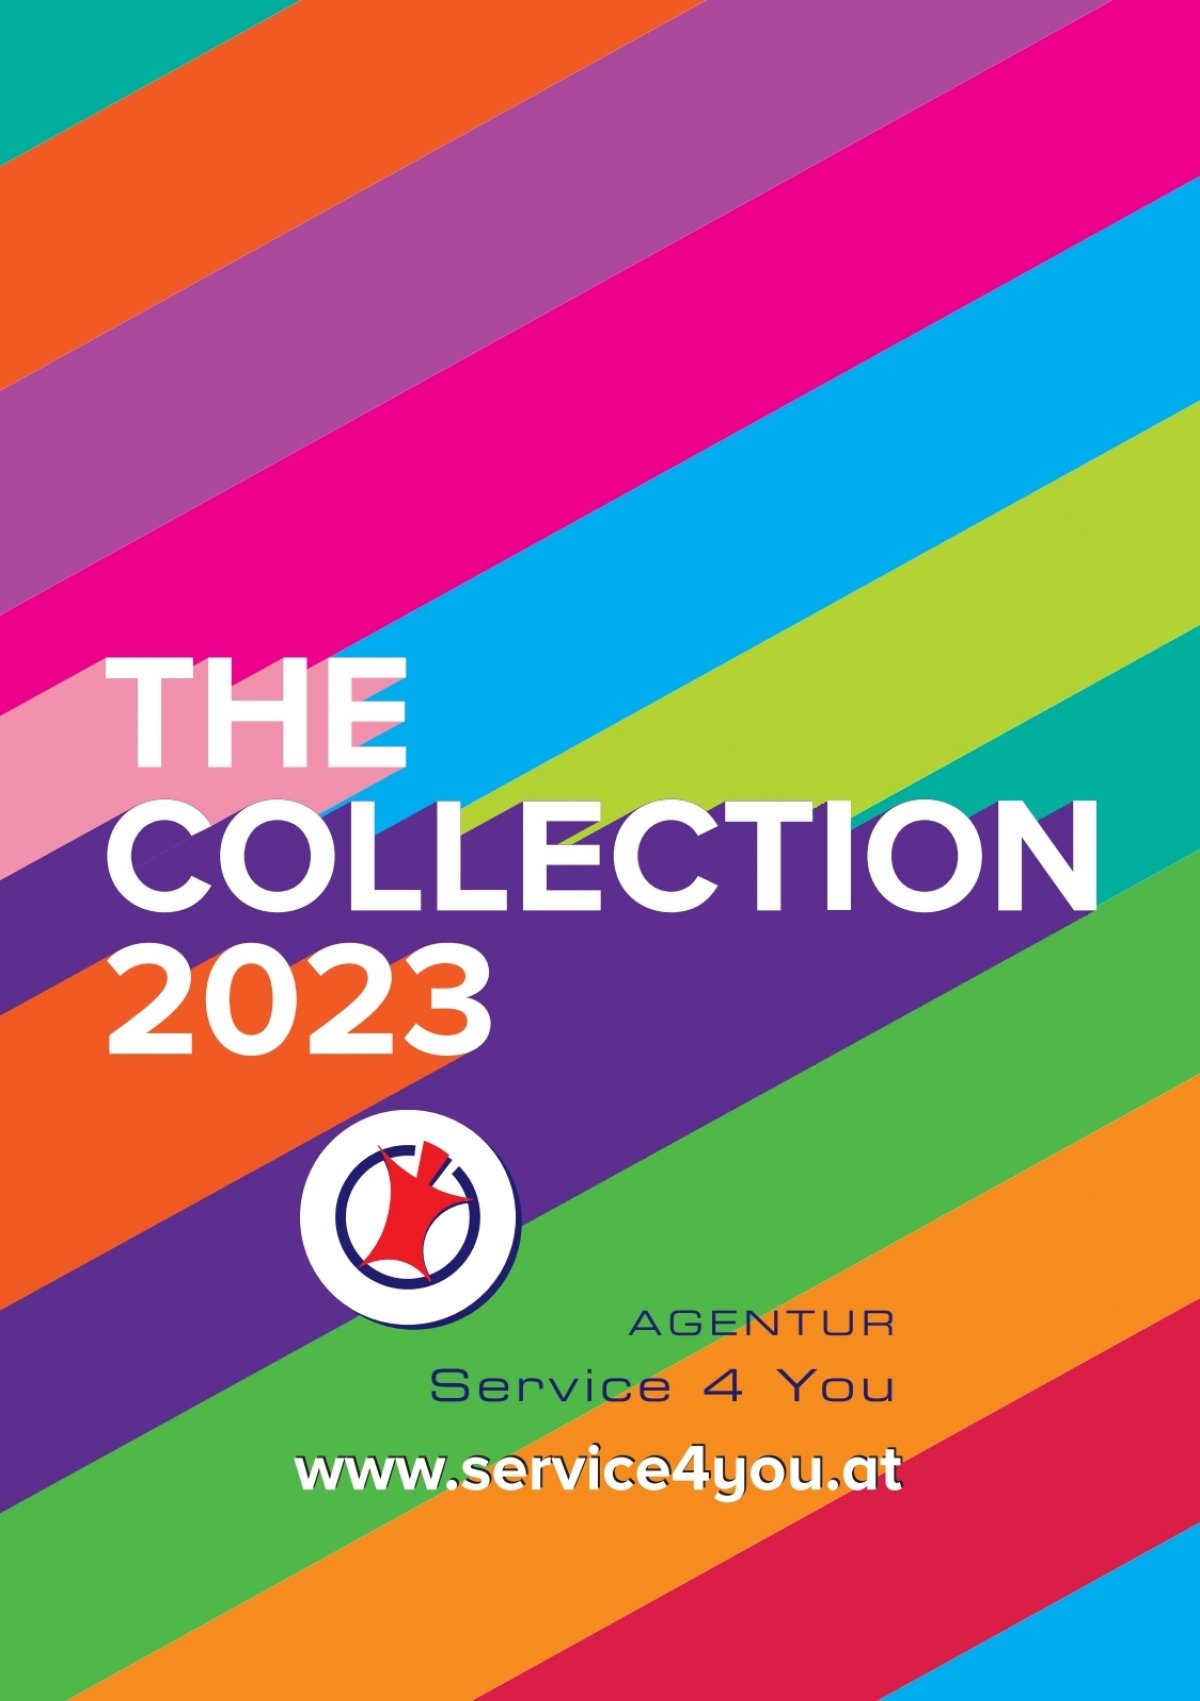 TheCollection2023_DE_withoutprices